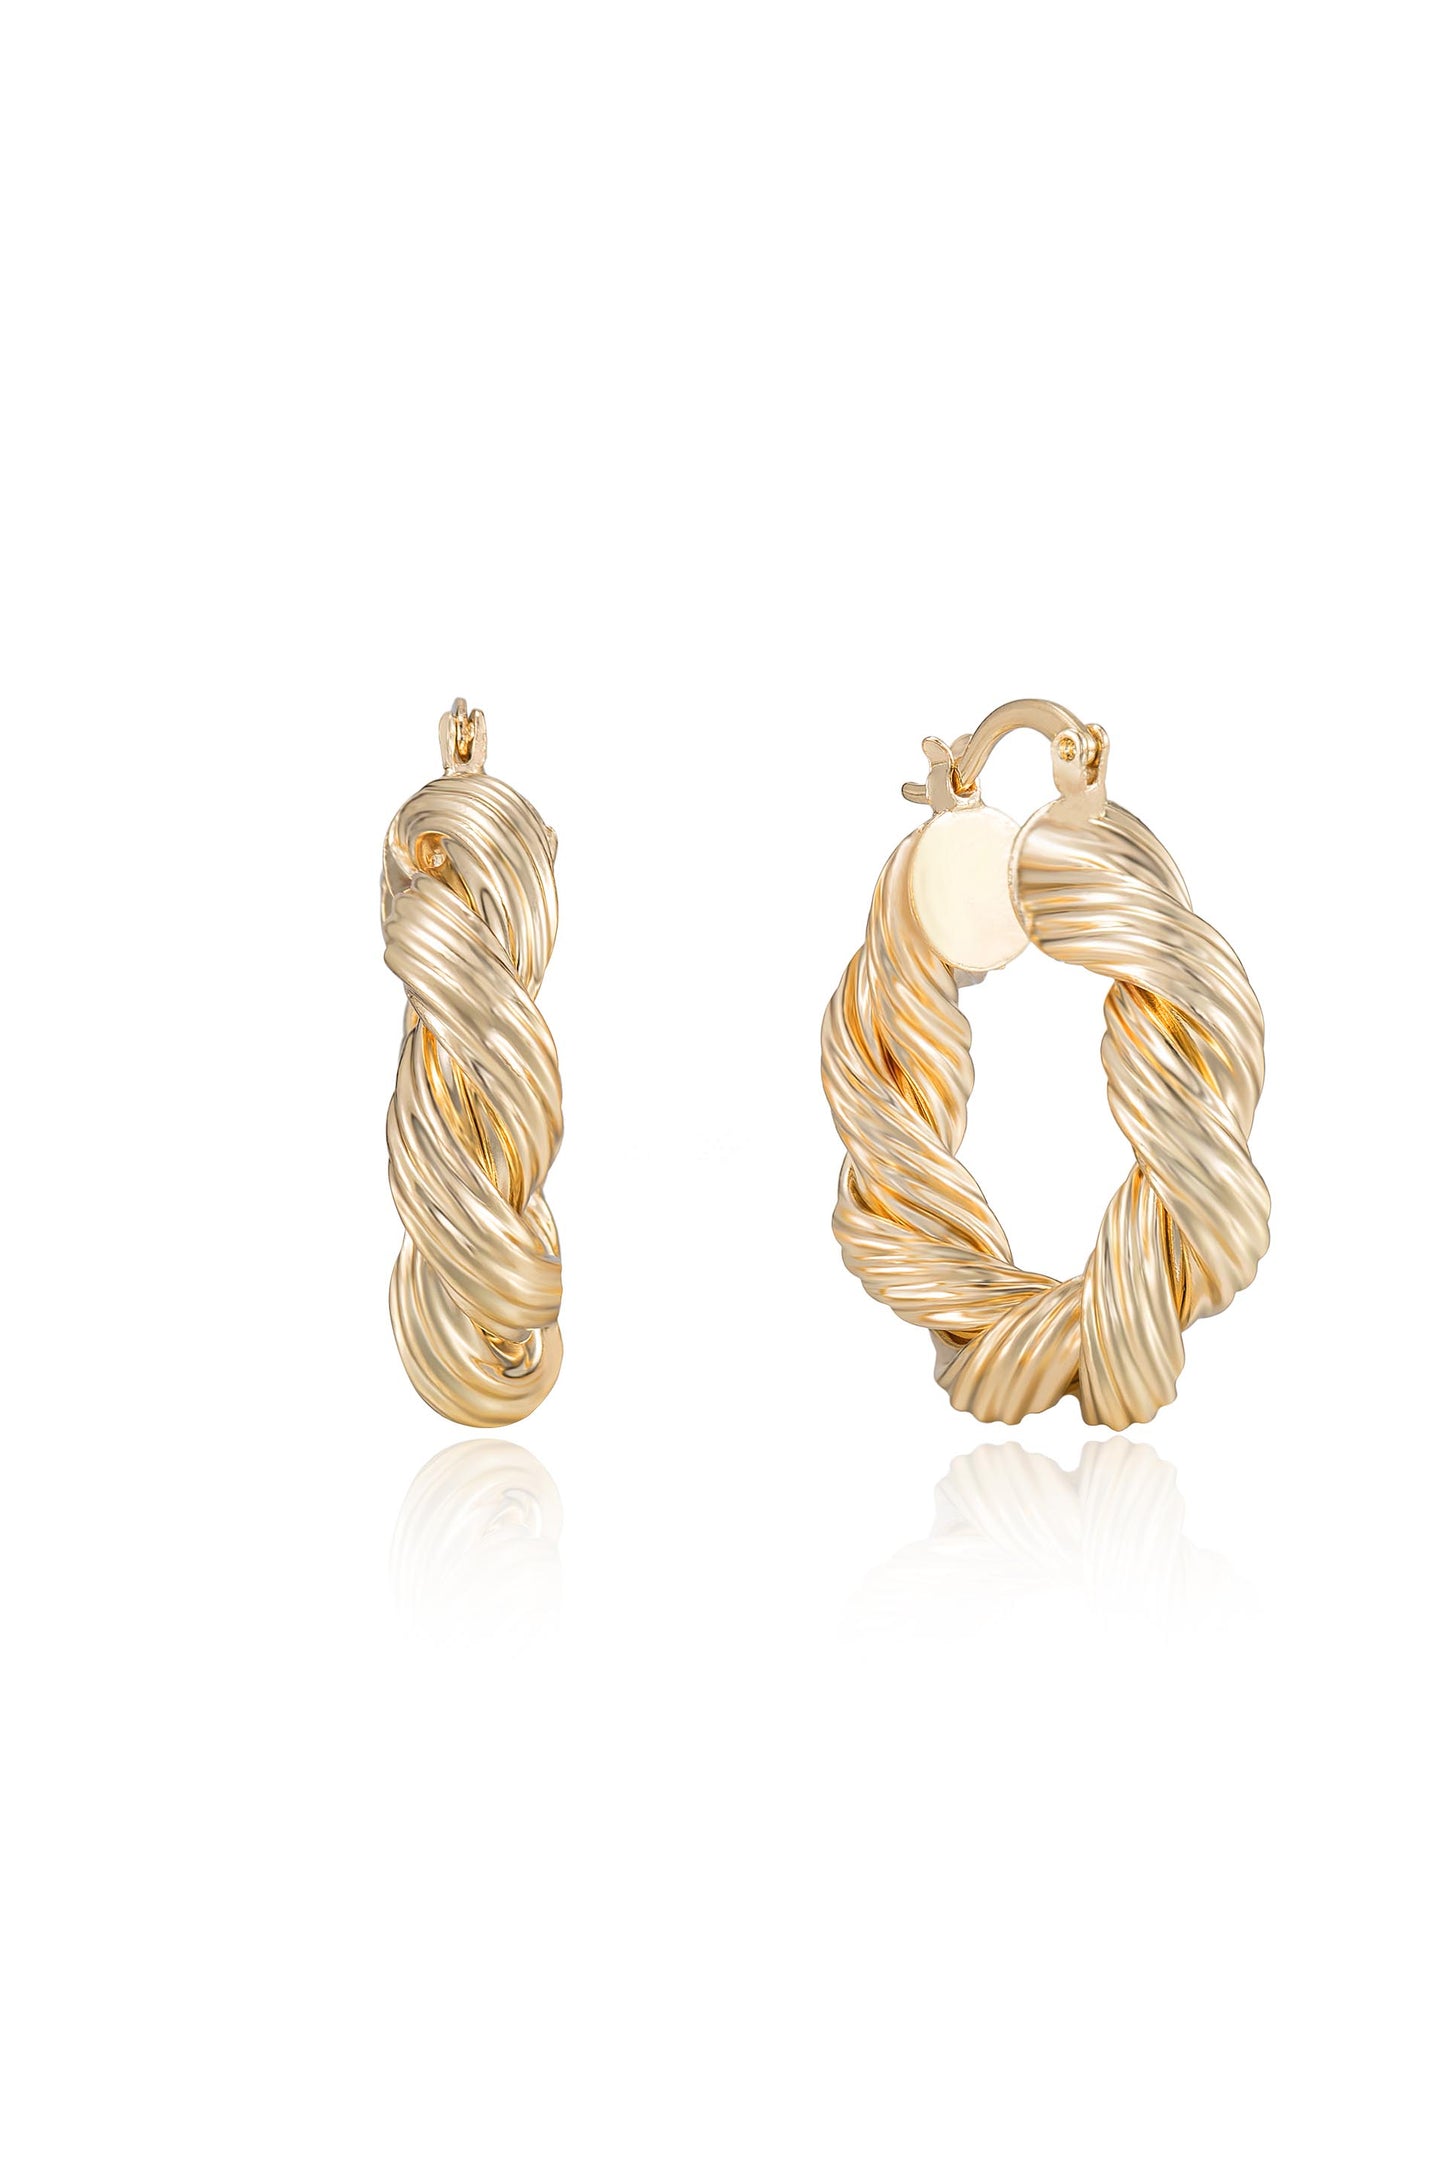 Modern Day 18k Gold Plated Twist Hoops on white